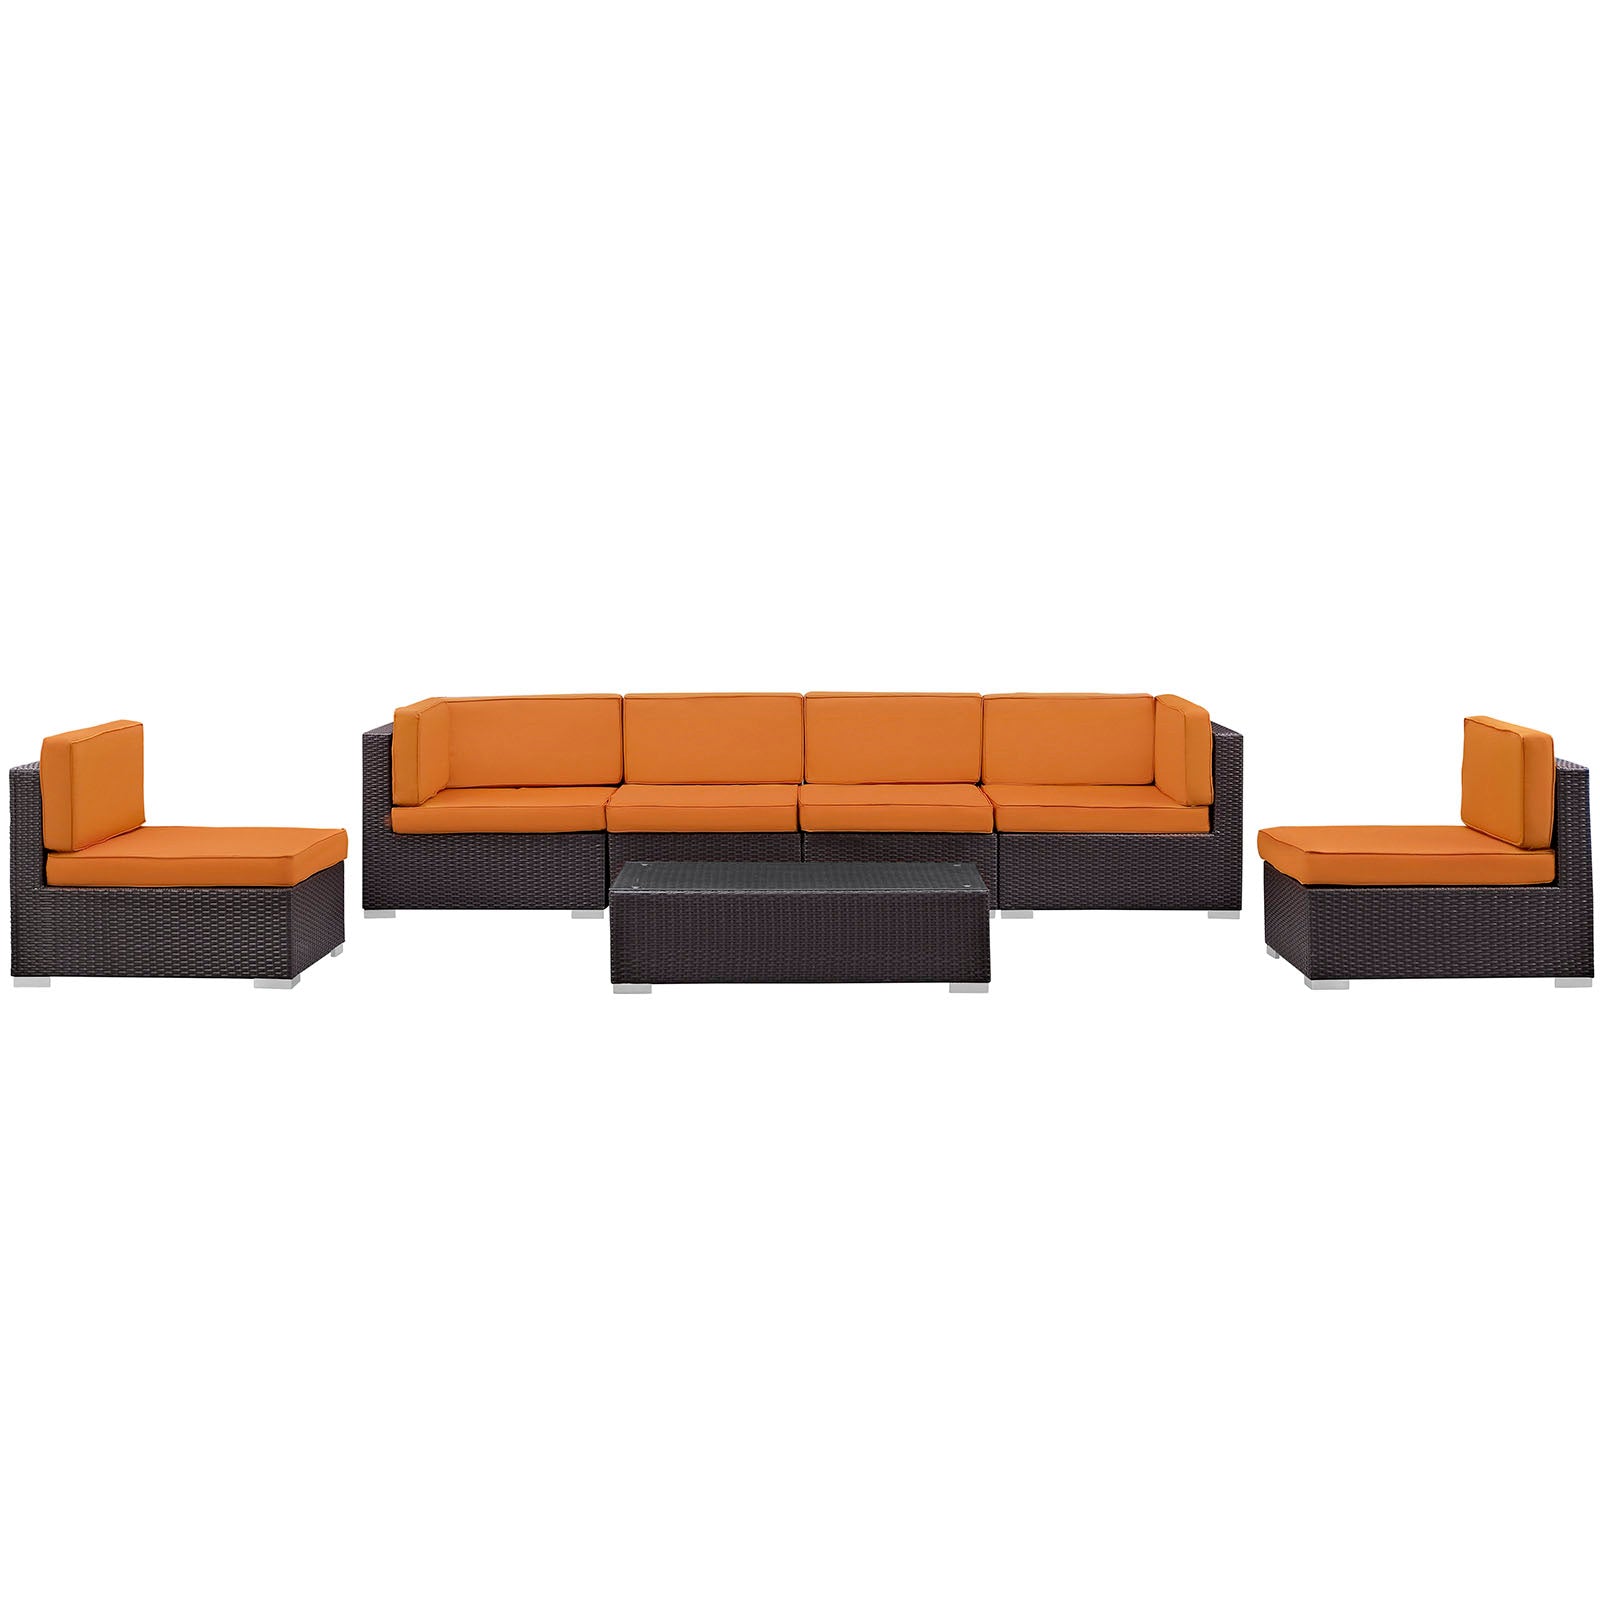 Aero 7 Piece Outdoor Patio Sectional Set-Outdoor Set-Modway-Wall2Wall Furnishings